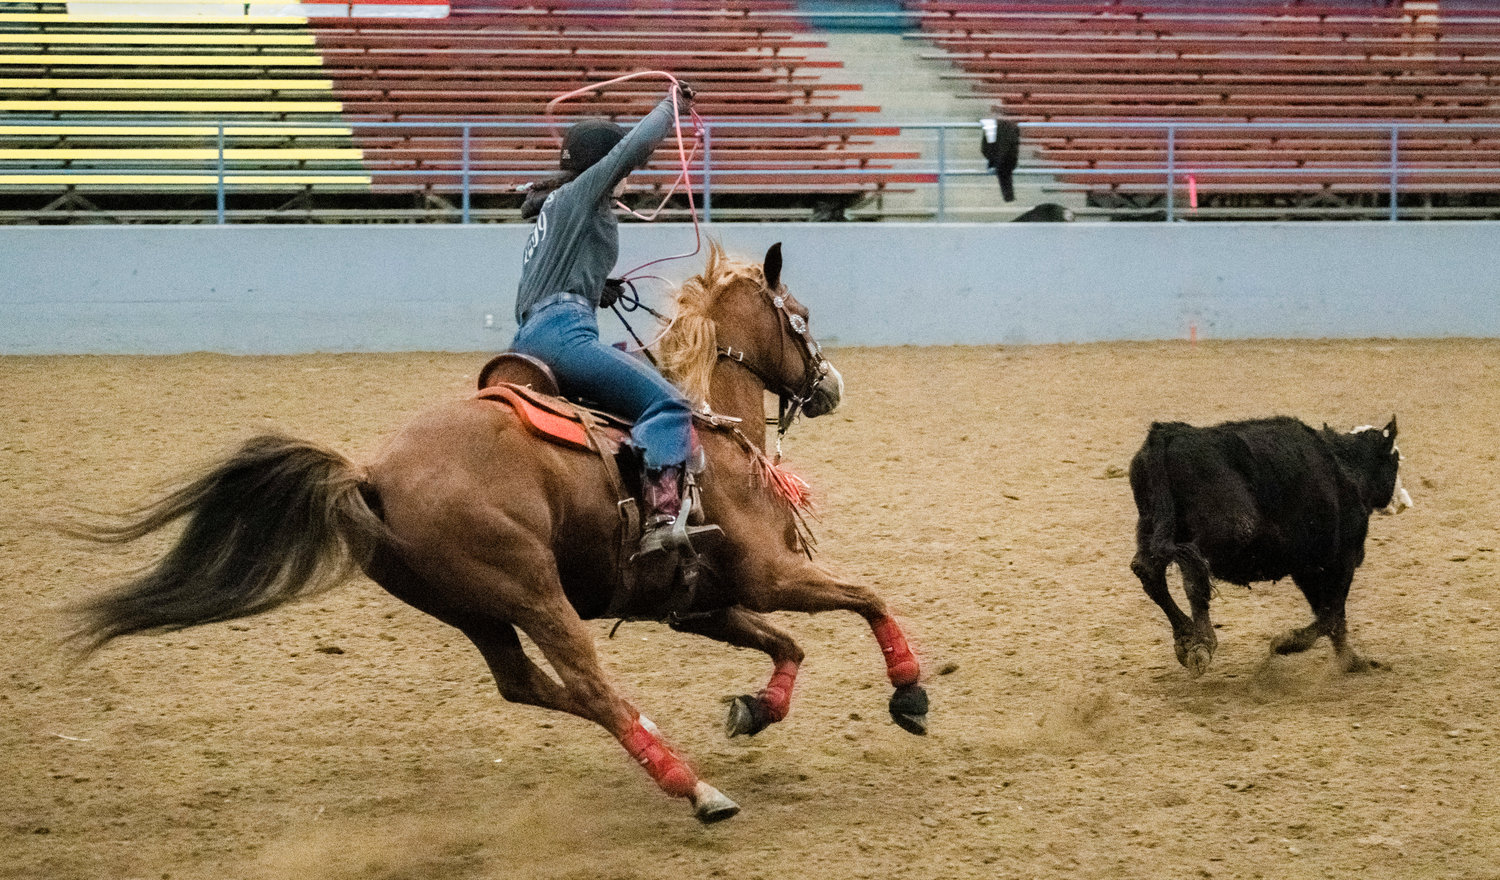 Mossyrock High School senior Josey Majors attempts to rope a calf for the W.F. West High School equestrian team during a district 6 meet on Sunday, March 19 at the Grays Harbor County Fairgrounds.